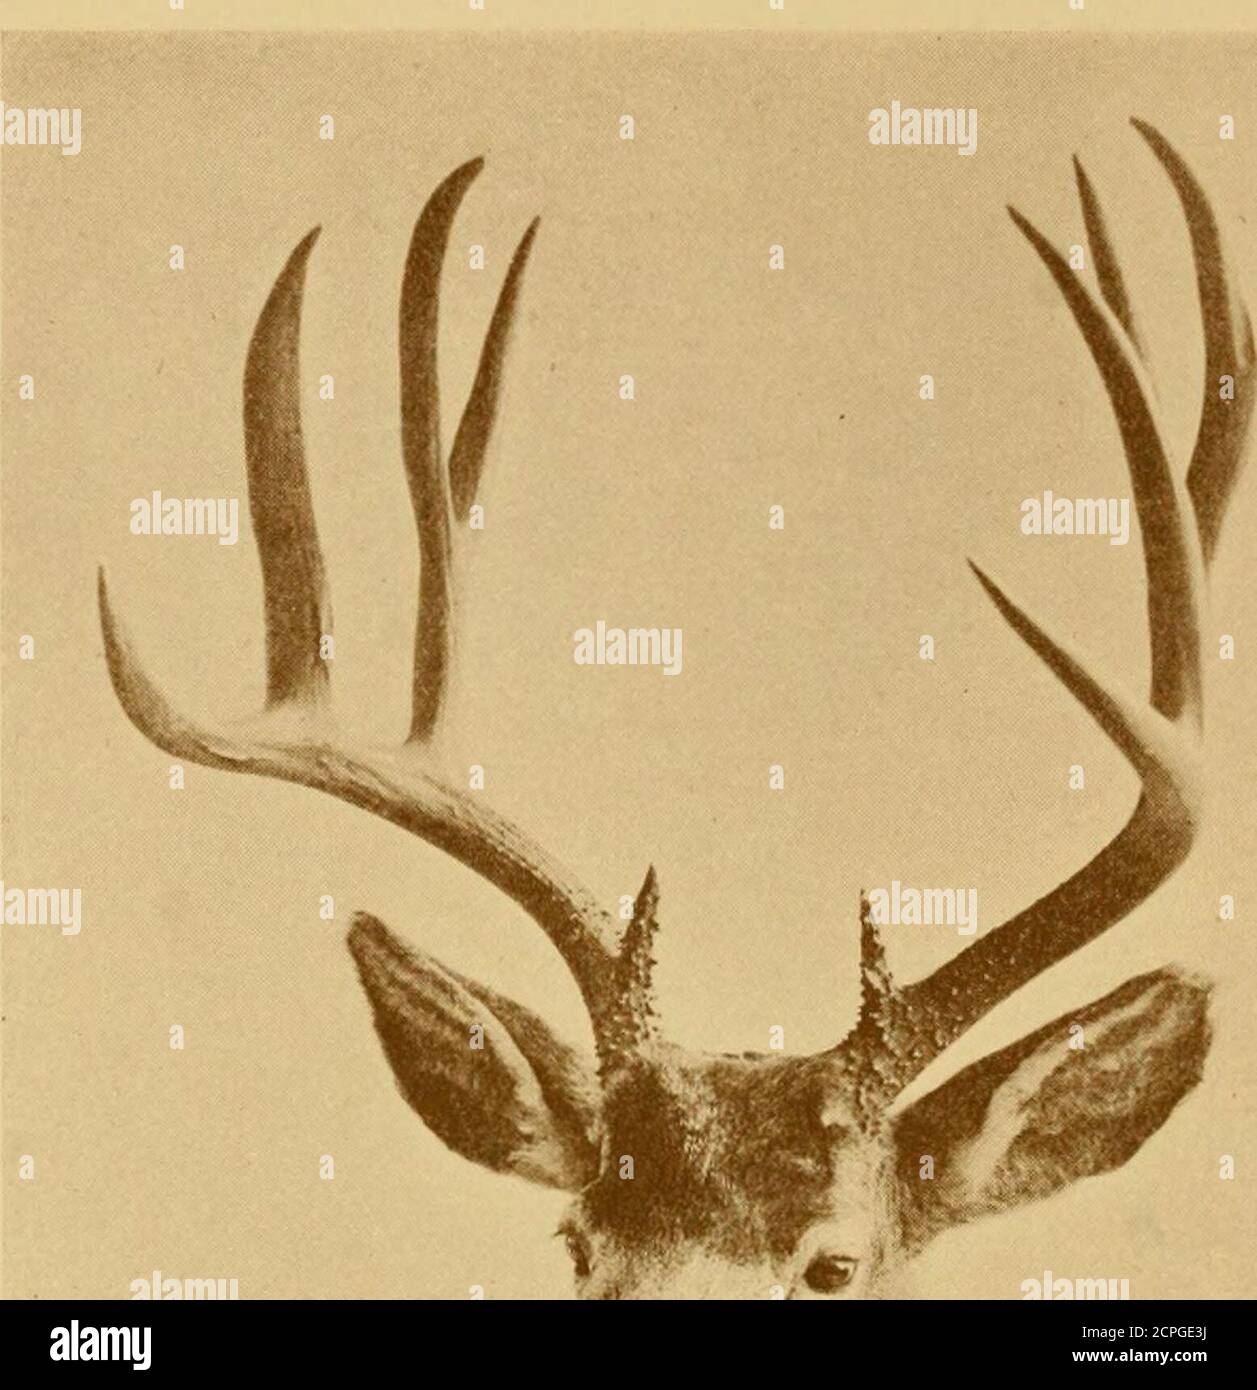 https://c8.alamy.com/comp/2CPGE3J/records-of-big-game-with-their-distribution-characteristics-dimensions-weights-and-horn-tusk-measurements-head-of-mexican-white-tailed-deer-in-the-collection-ofmajor-w-anstruther-gray-mexican-white-tail-m-americana-lichtensteini-this-is-one-of-the-smaller-races-of-the-species-the-height-at-theshoulder-ranging-from-about-33-to-36-inches-and-the-antlers-beingusually-smaller-and-simpler-than-in-the-northern-racedistributionmexico-in-northern-mexico-this-race-is-represented-by-the-texan-m-a-texana-and-in-the-extreme-south-by-m-a-tolteca-which-does-not-turn-red-th-2CPGE3J.jpg